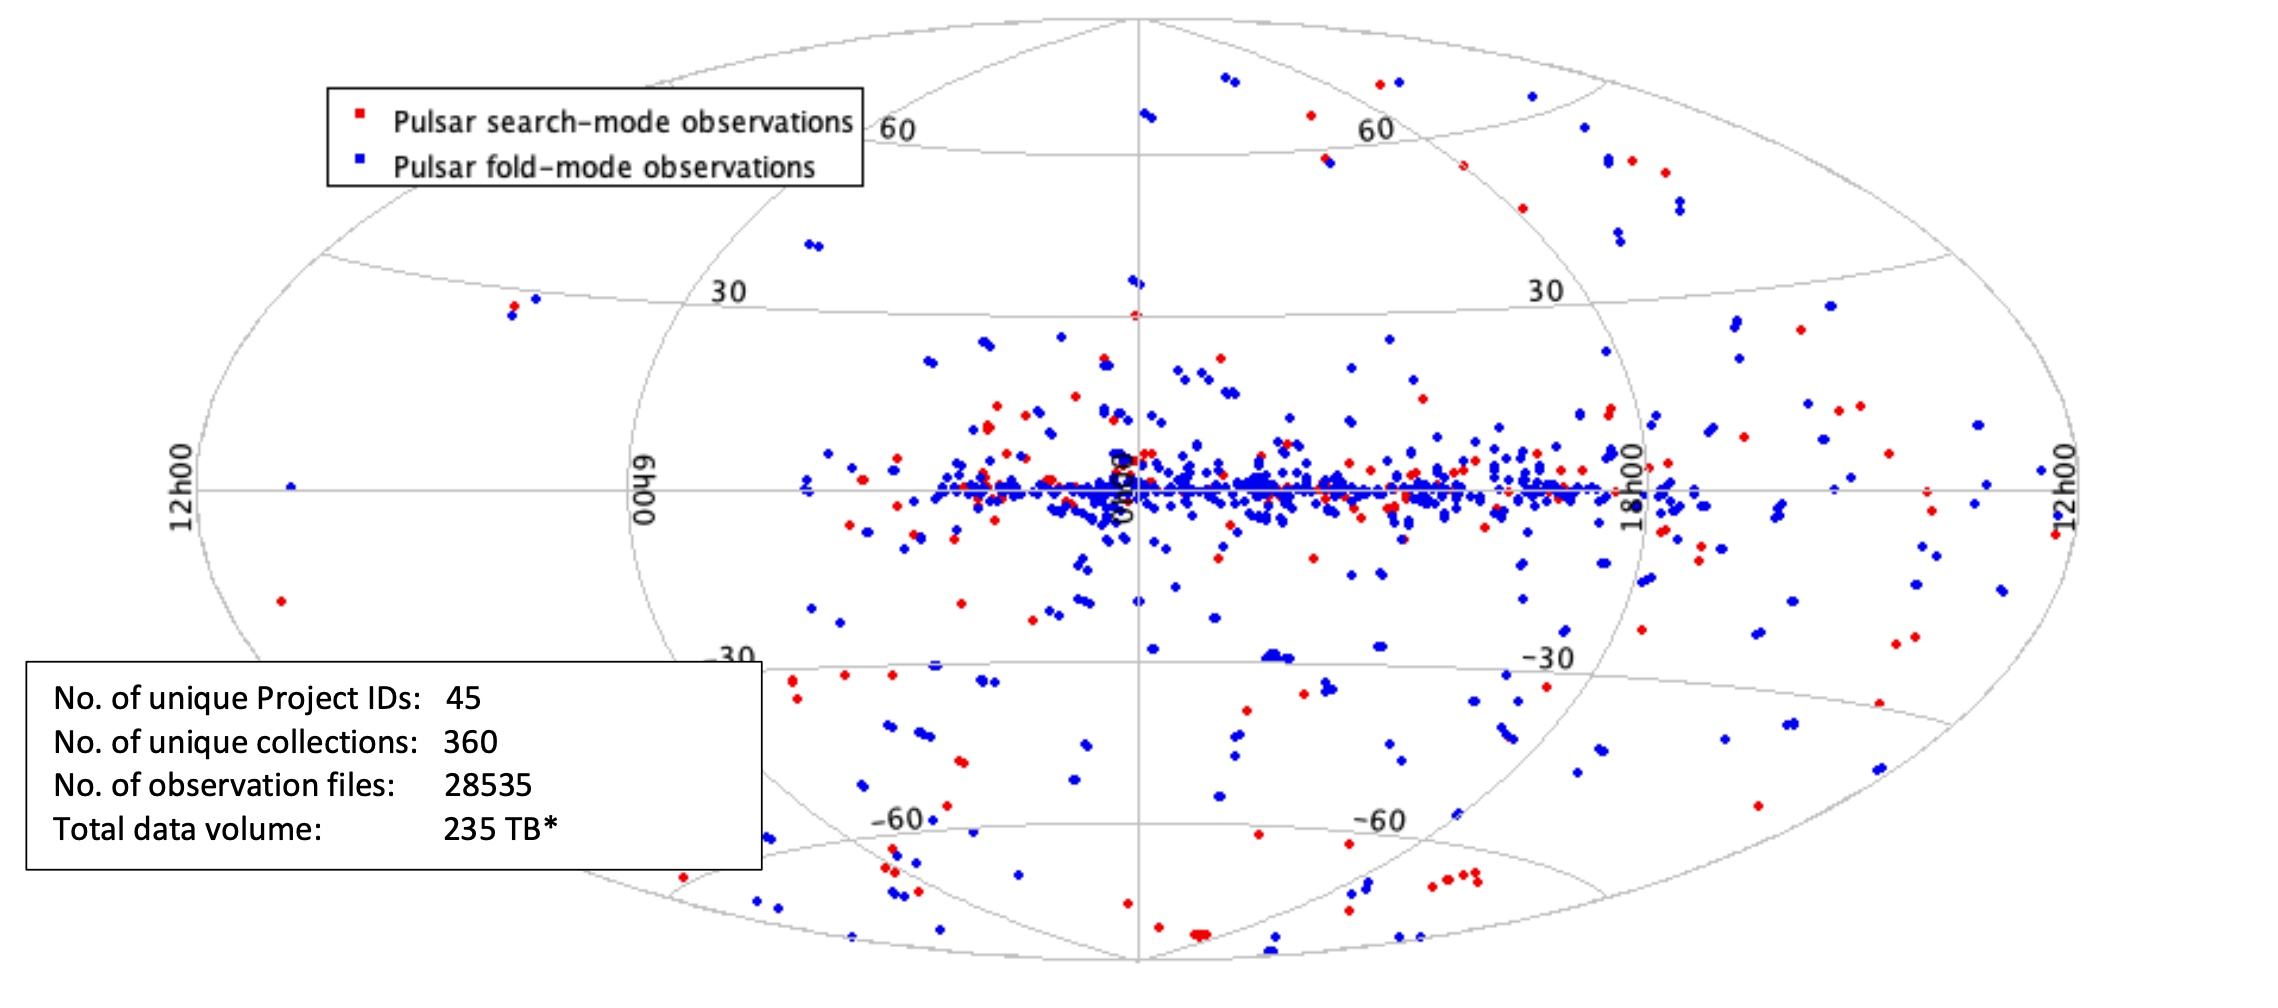 A Hammer-Aitoff projection in Galactic coordinates of the observations from the MEDUSA Parkes pulsar backend for the 2023OCT semester.